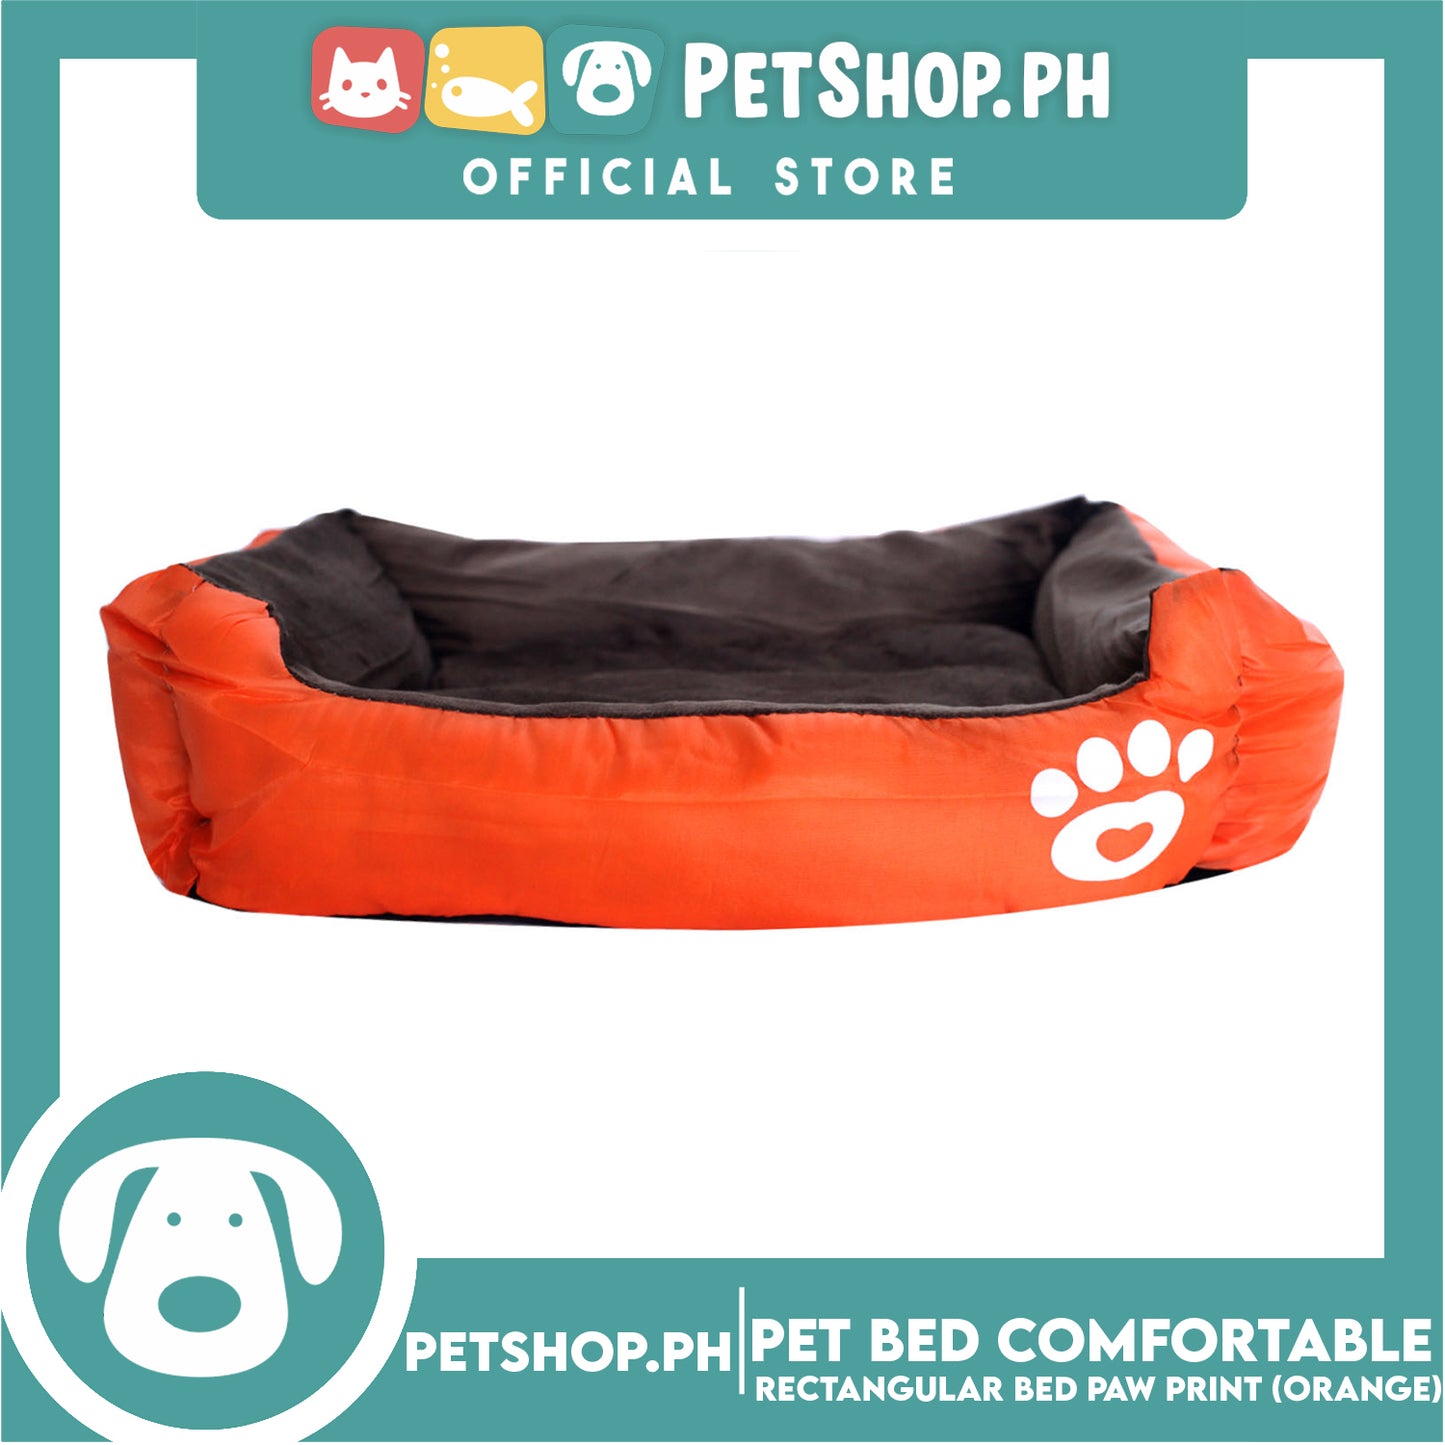 Pet Bed Comfortable Rectangular Pet Bed with Paw Print 50x40x12cm Small for Dogs & Cats (Orange)